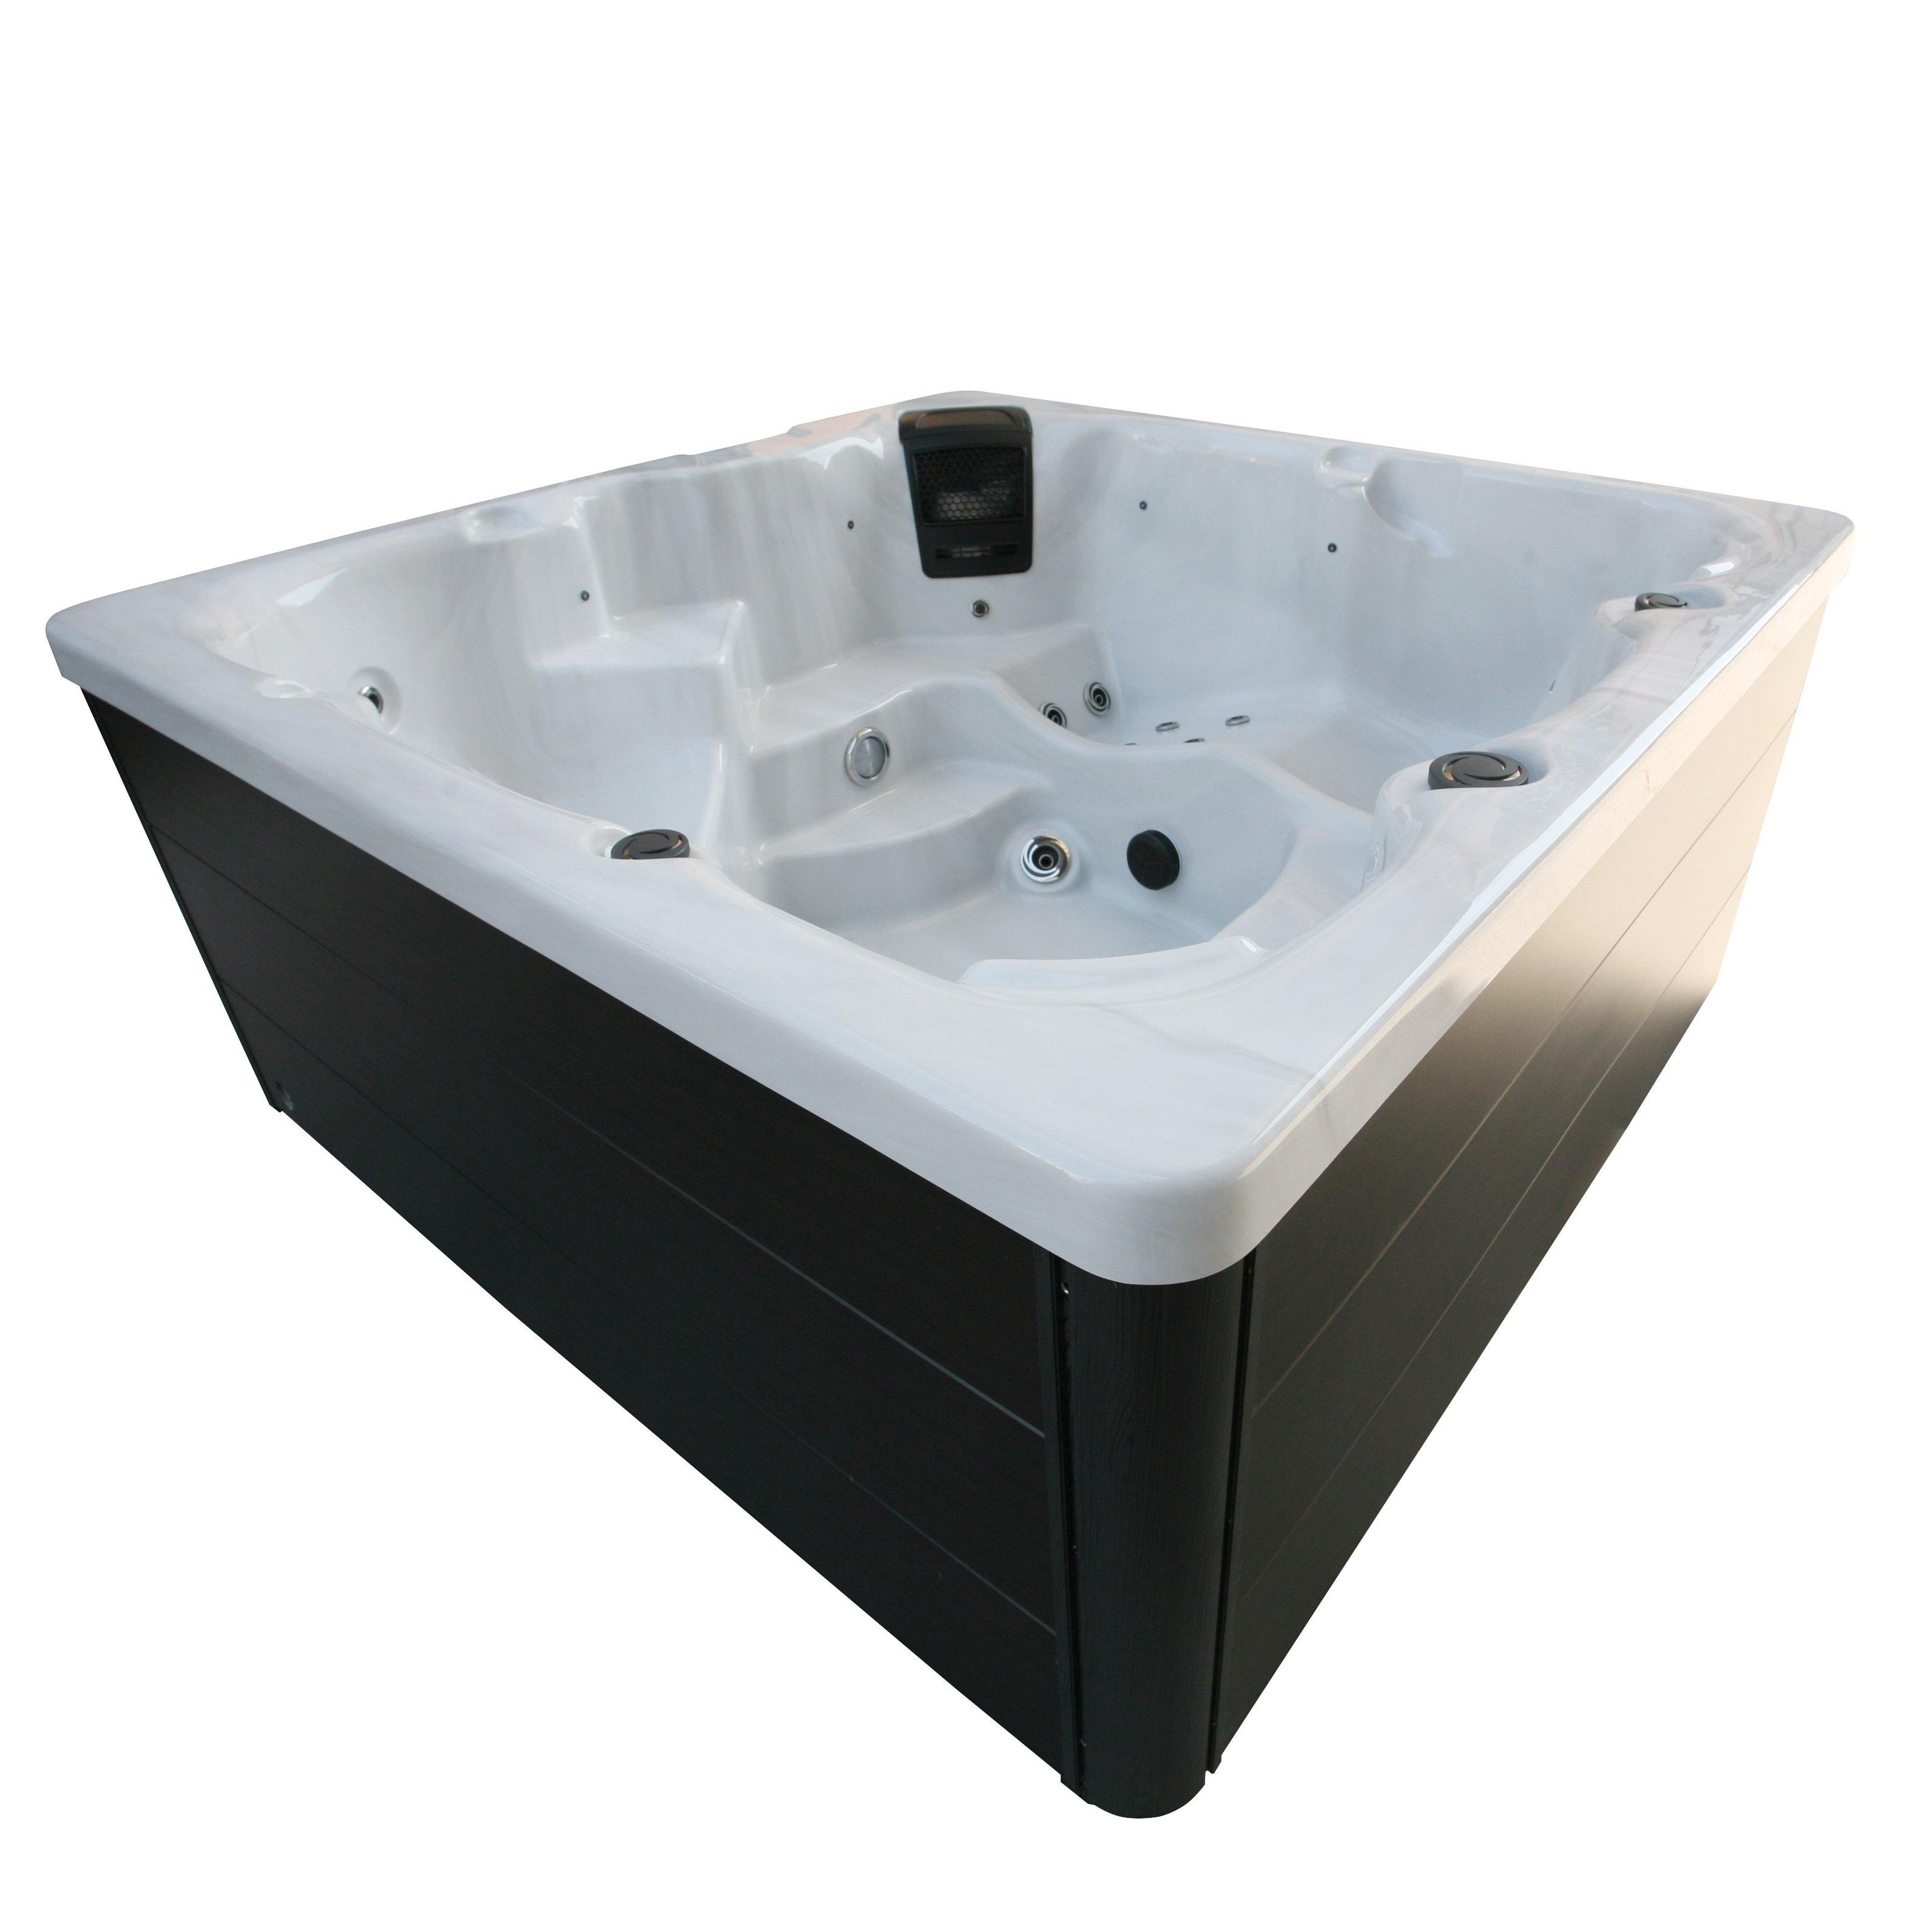 side view of acrylic hot tub, featuring jets, motors, and frames made of aluminum